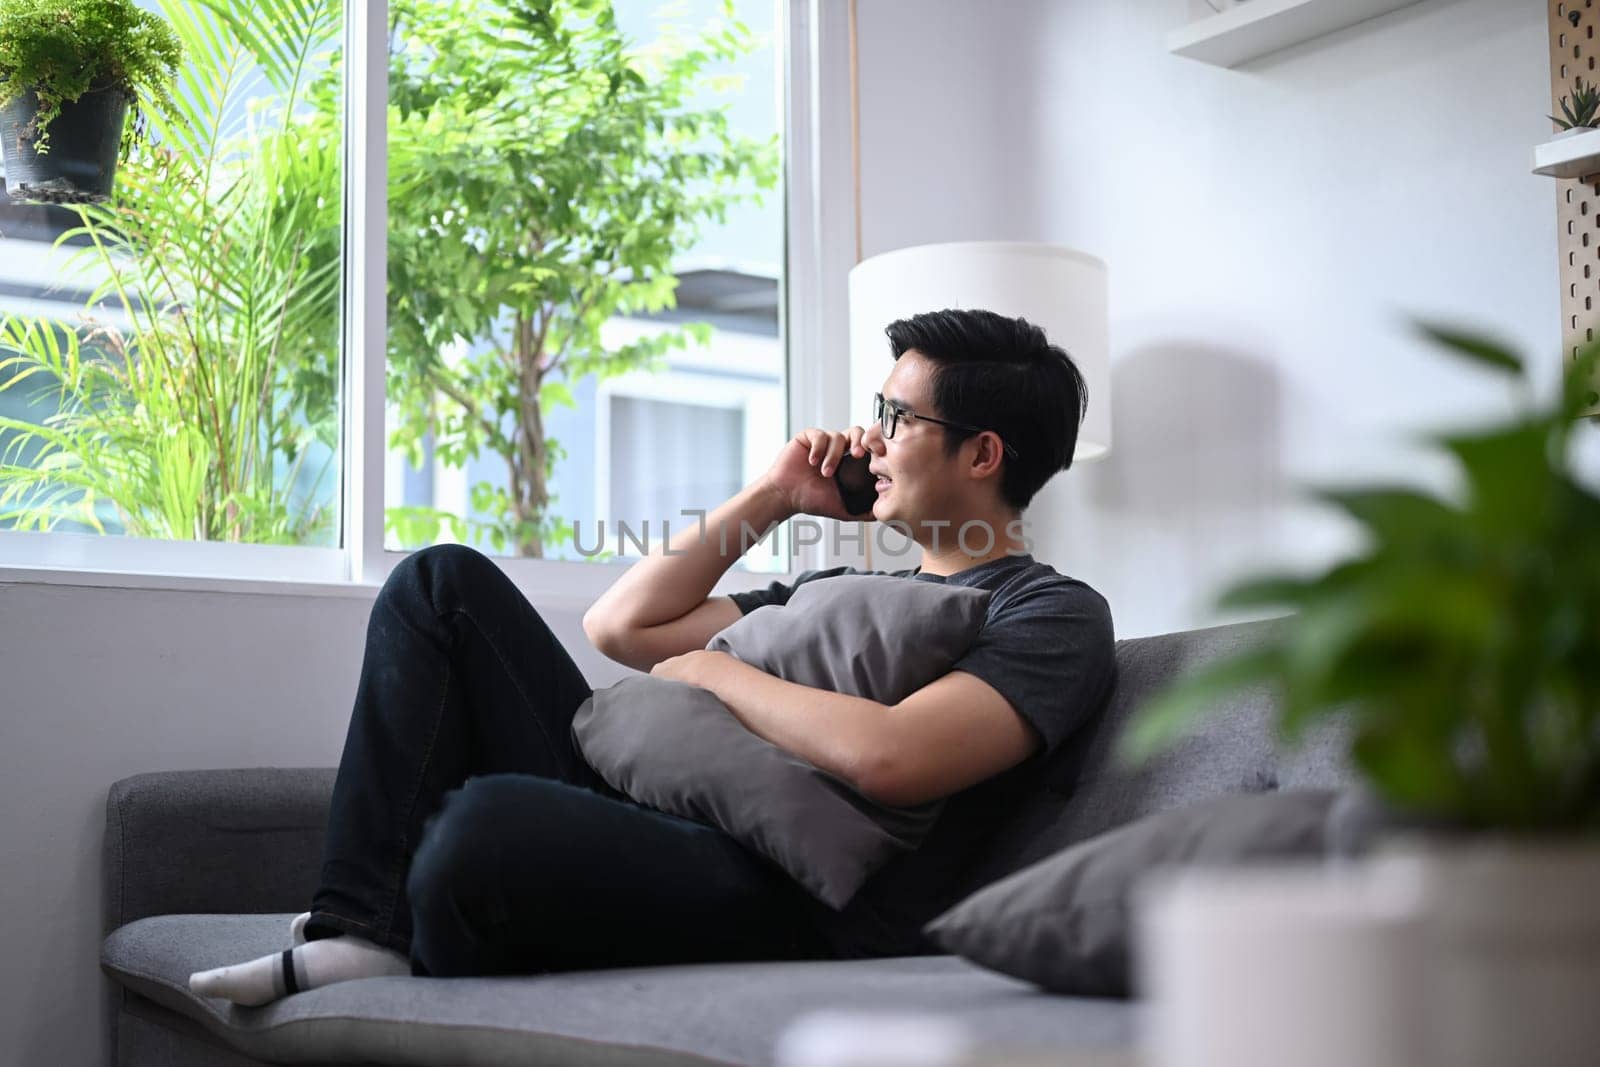 Young Asian man sitting on couch and talking on mobile phone.